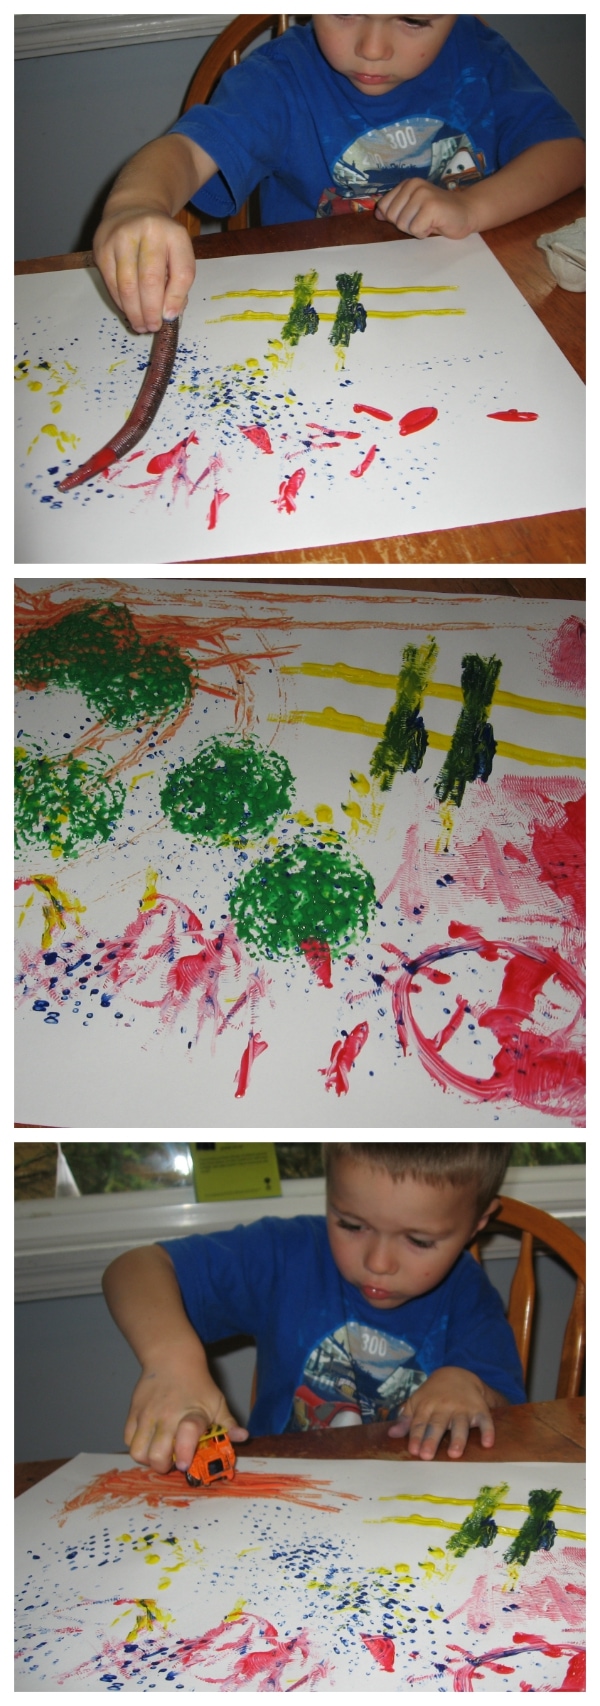 Painting with our "Fancy Paintbrushes" from Walking by the Way